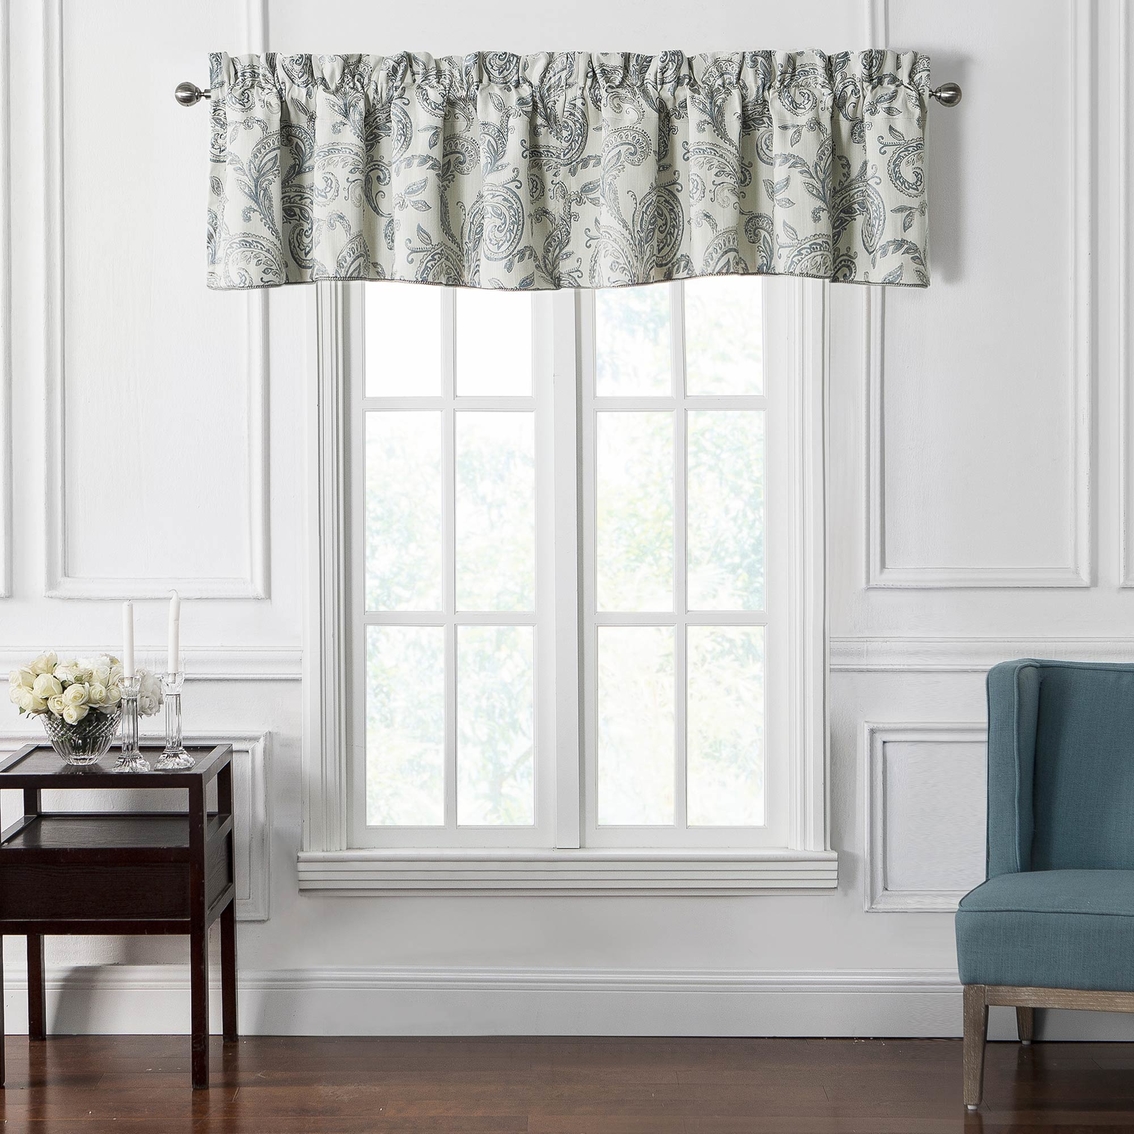 Waterford Florence Chambray Blue Scalloped Valance - Image 2 of 3